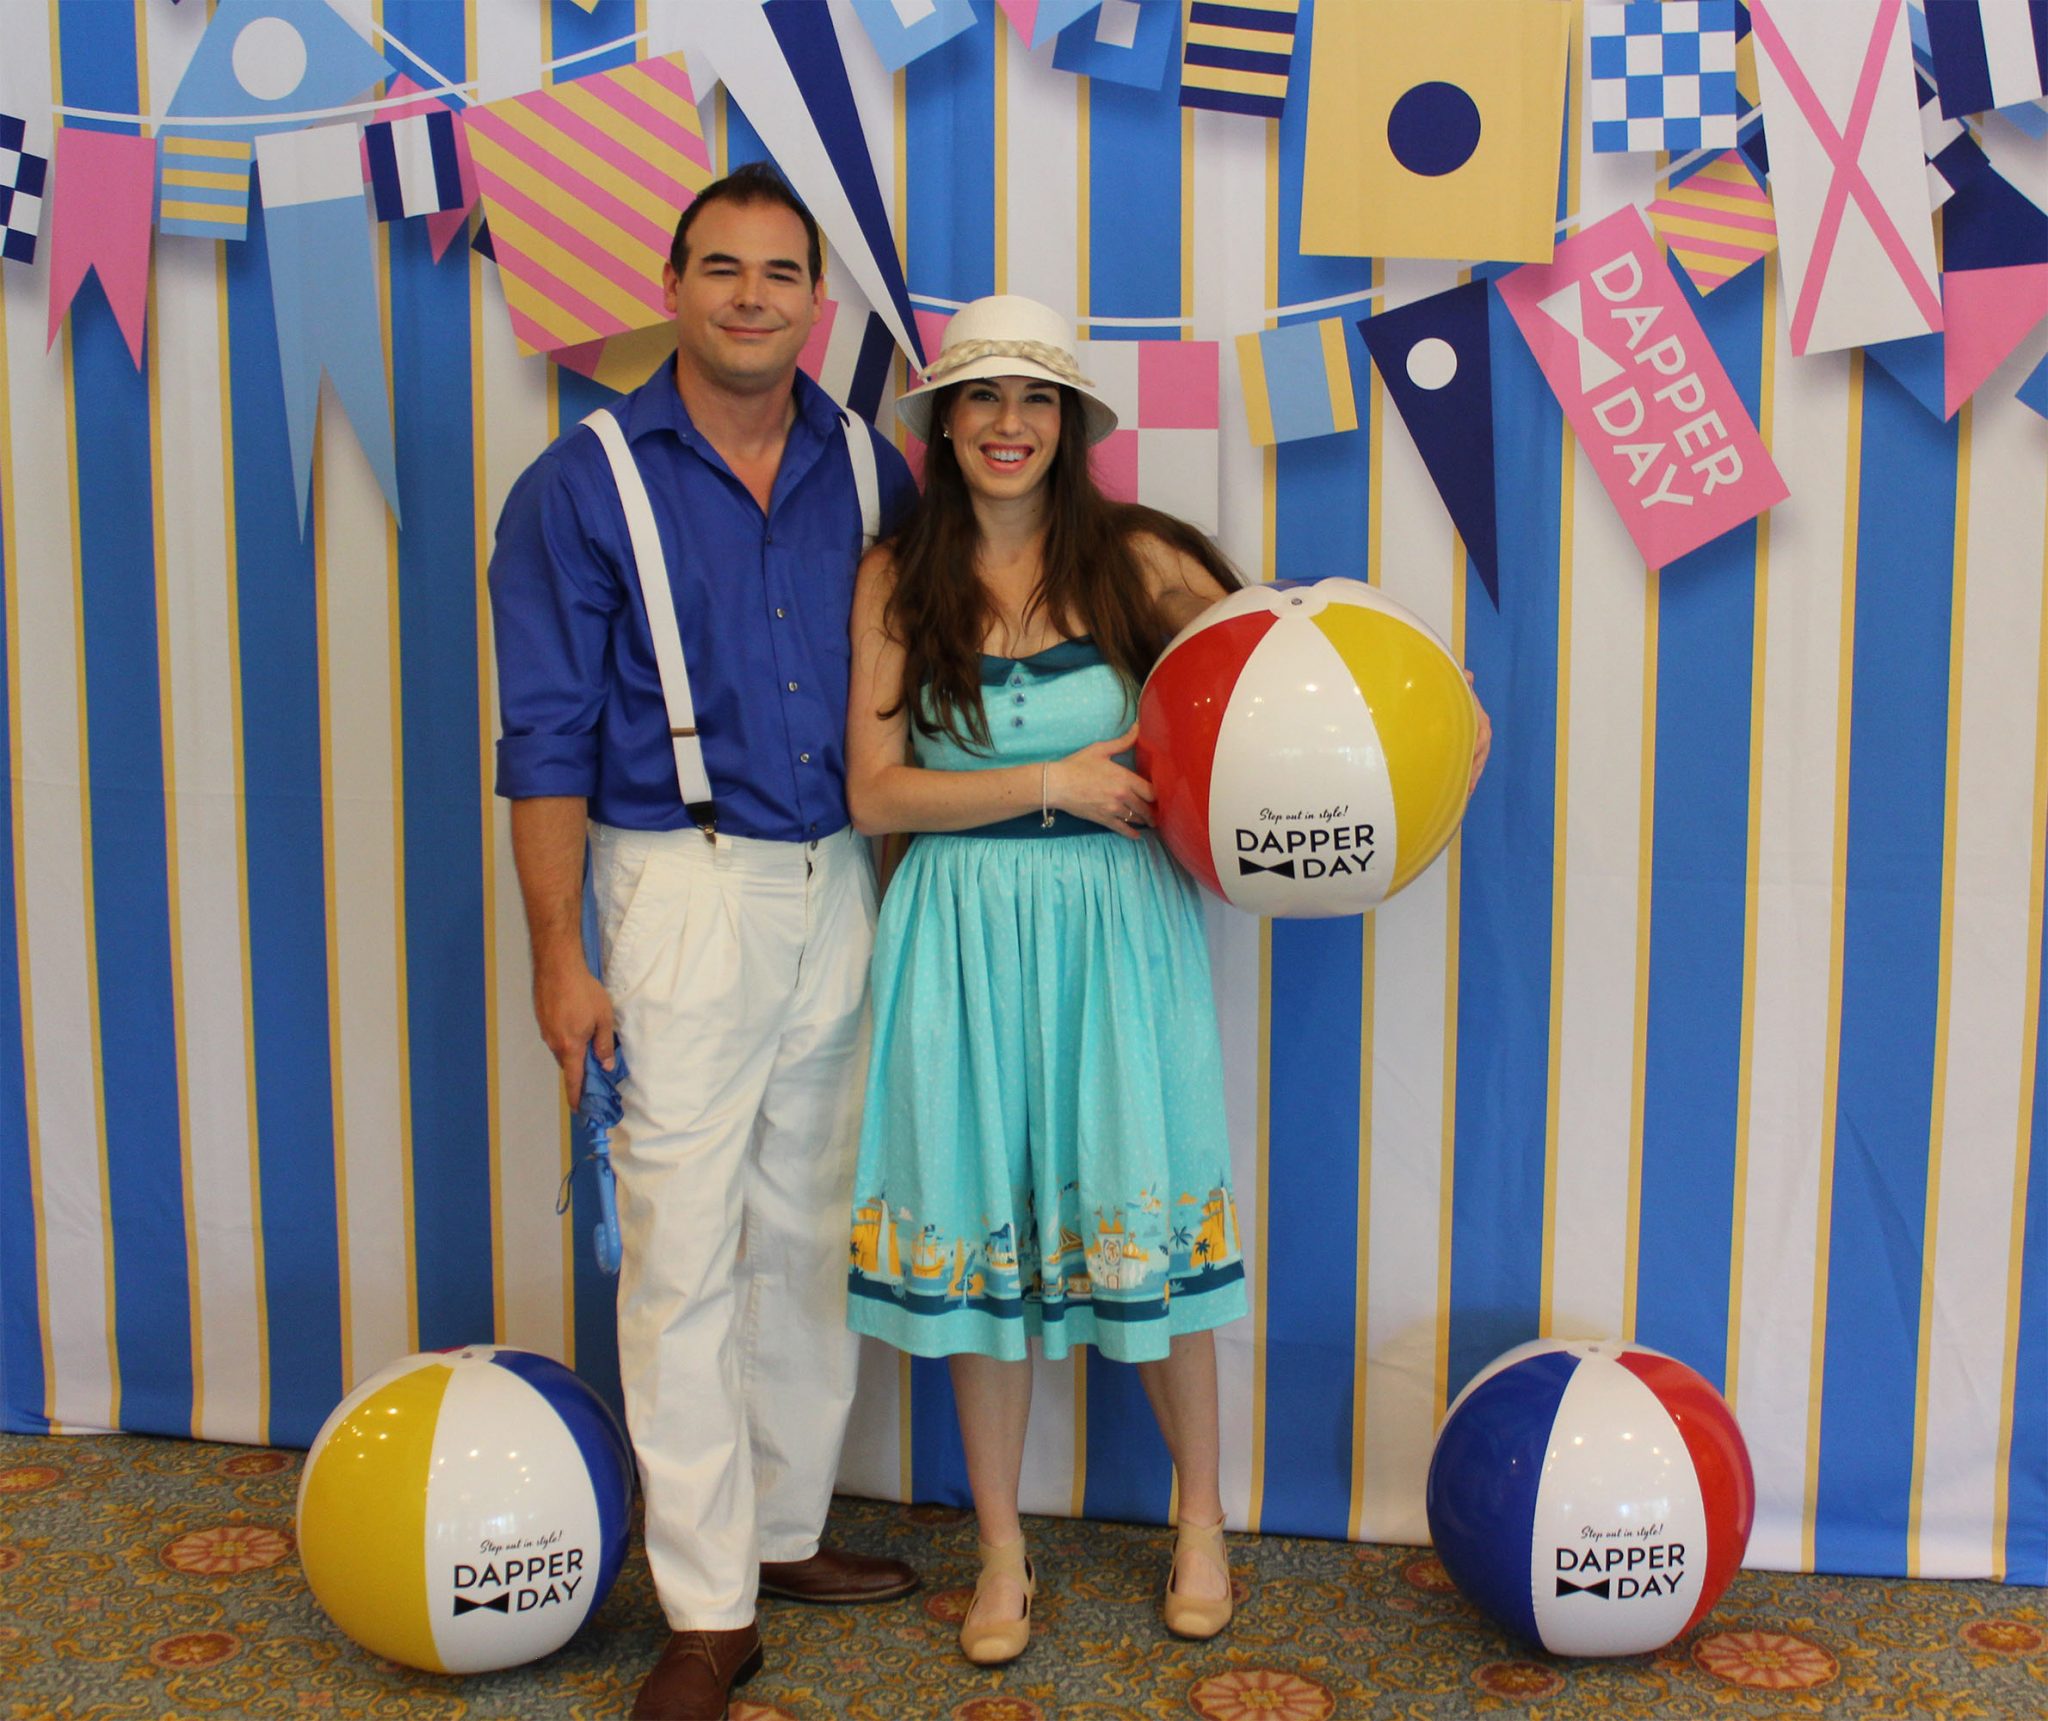 Chelsea and Jay with the official Dapper Day photo backdrop.